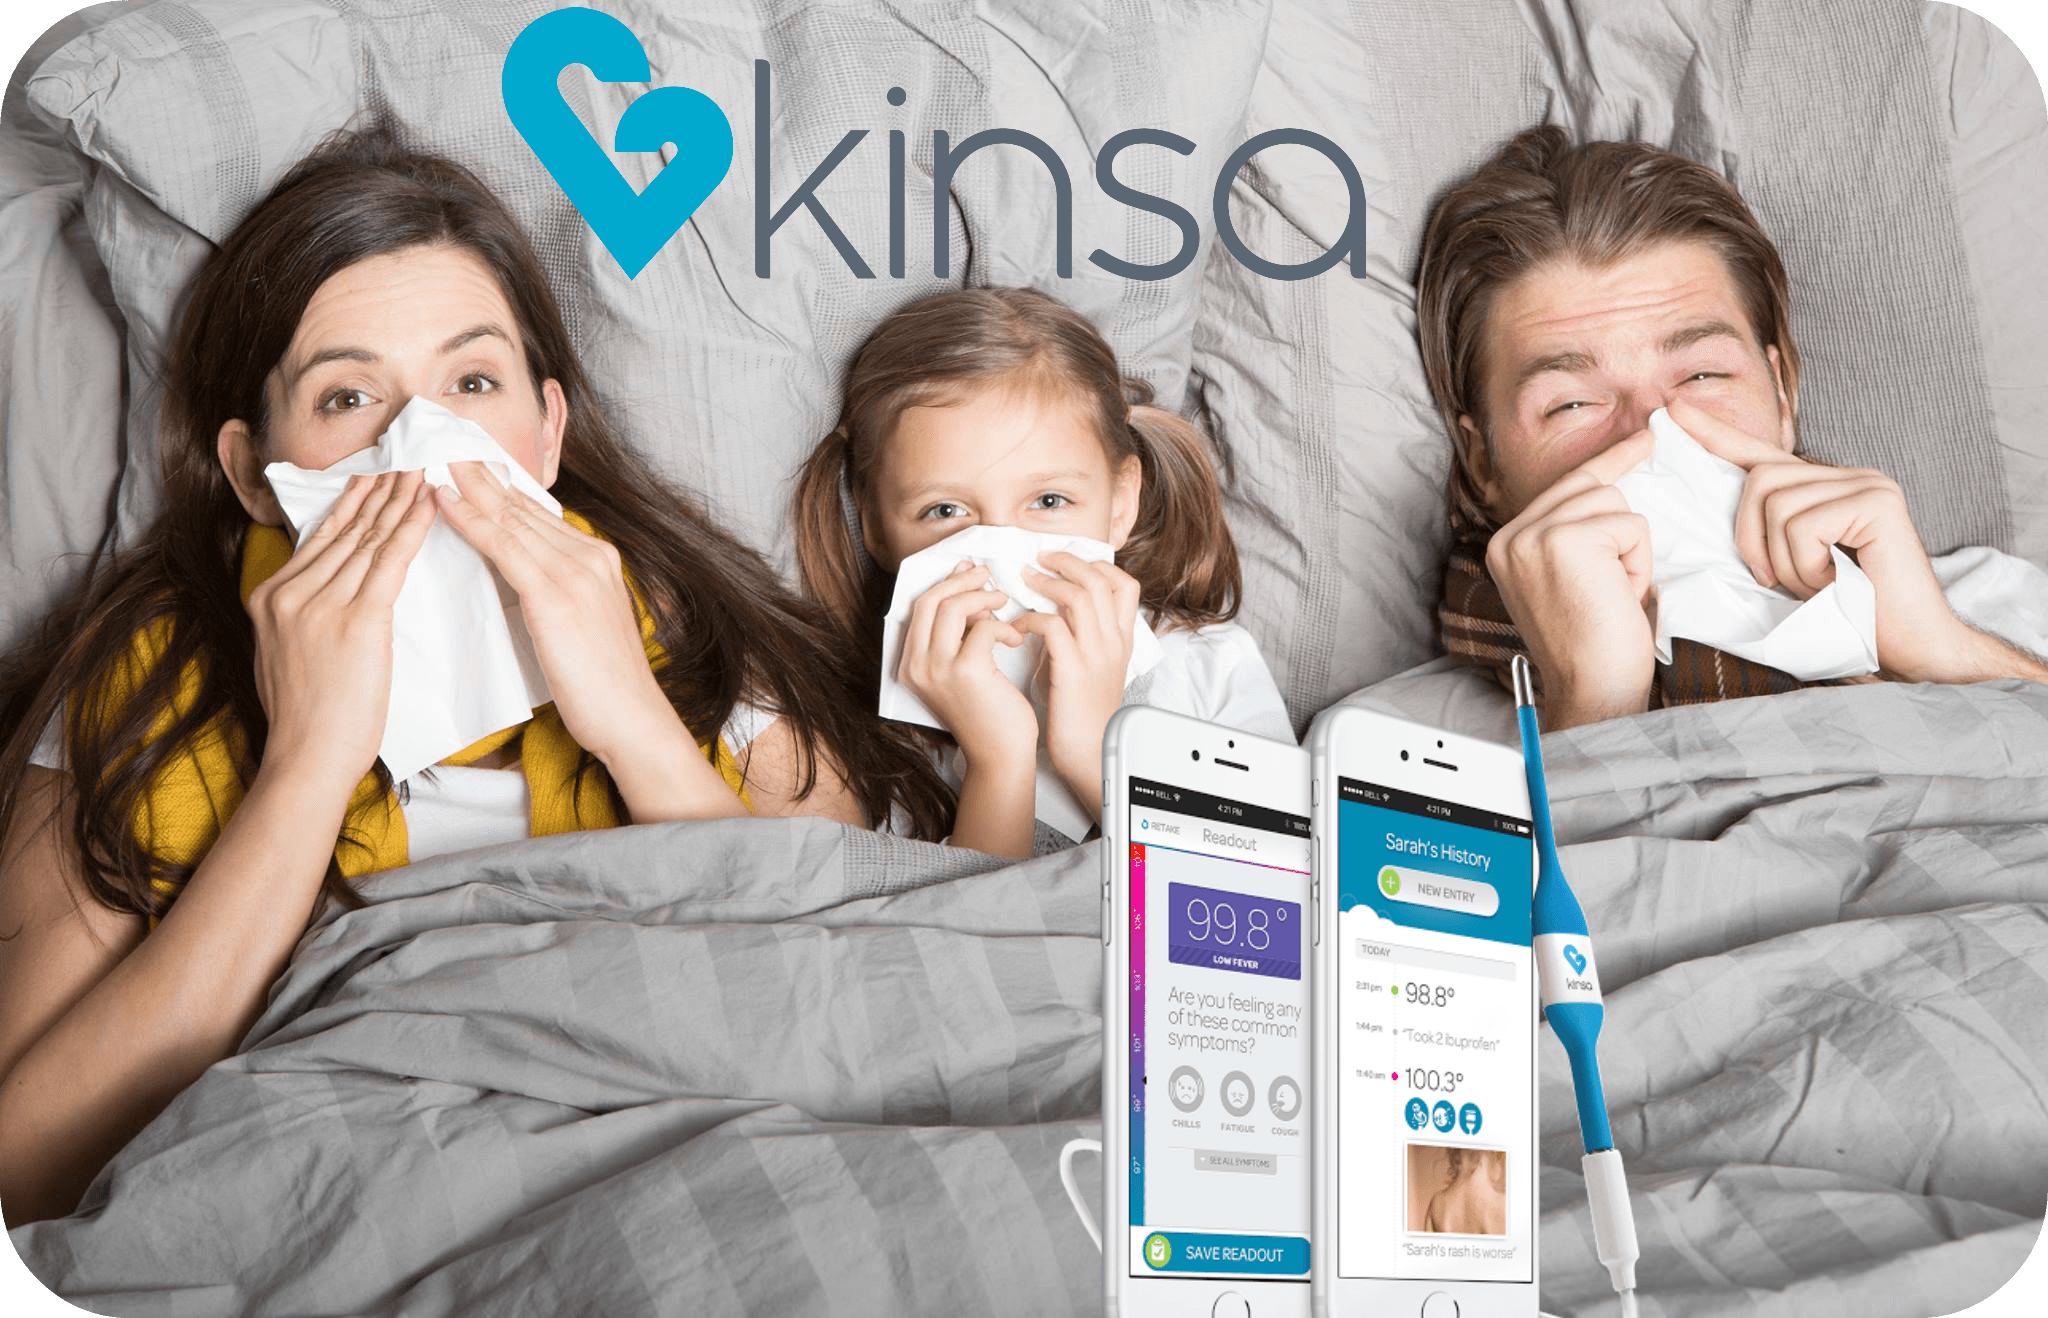 Kinsa's crowdsourced smart thermometer data now rivals the CDC at